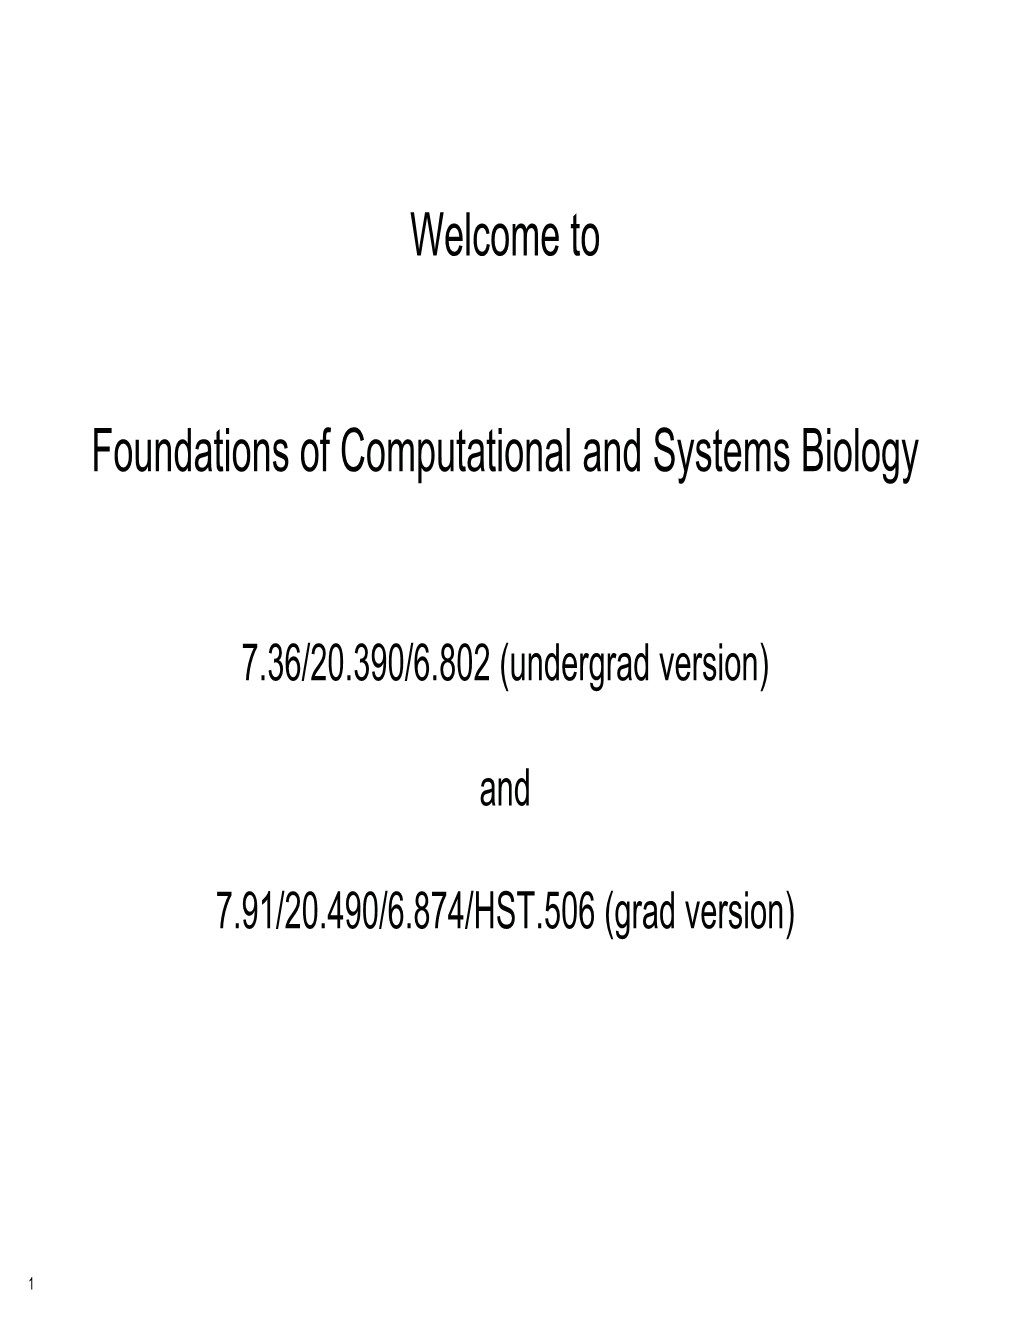 Foundations of Computational and Systems Biology